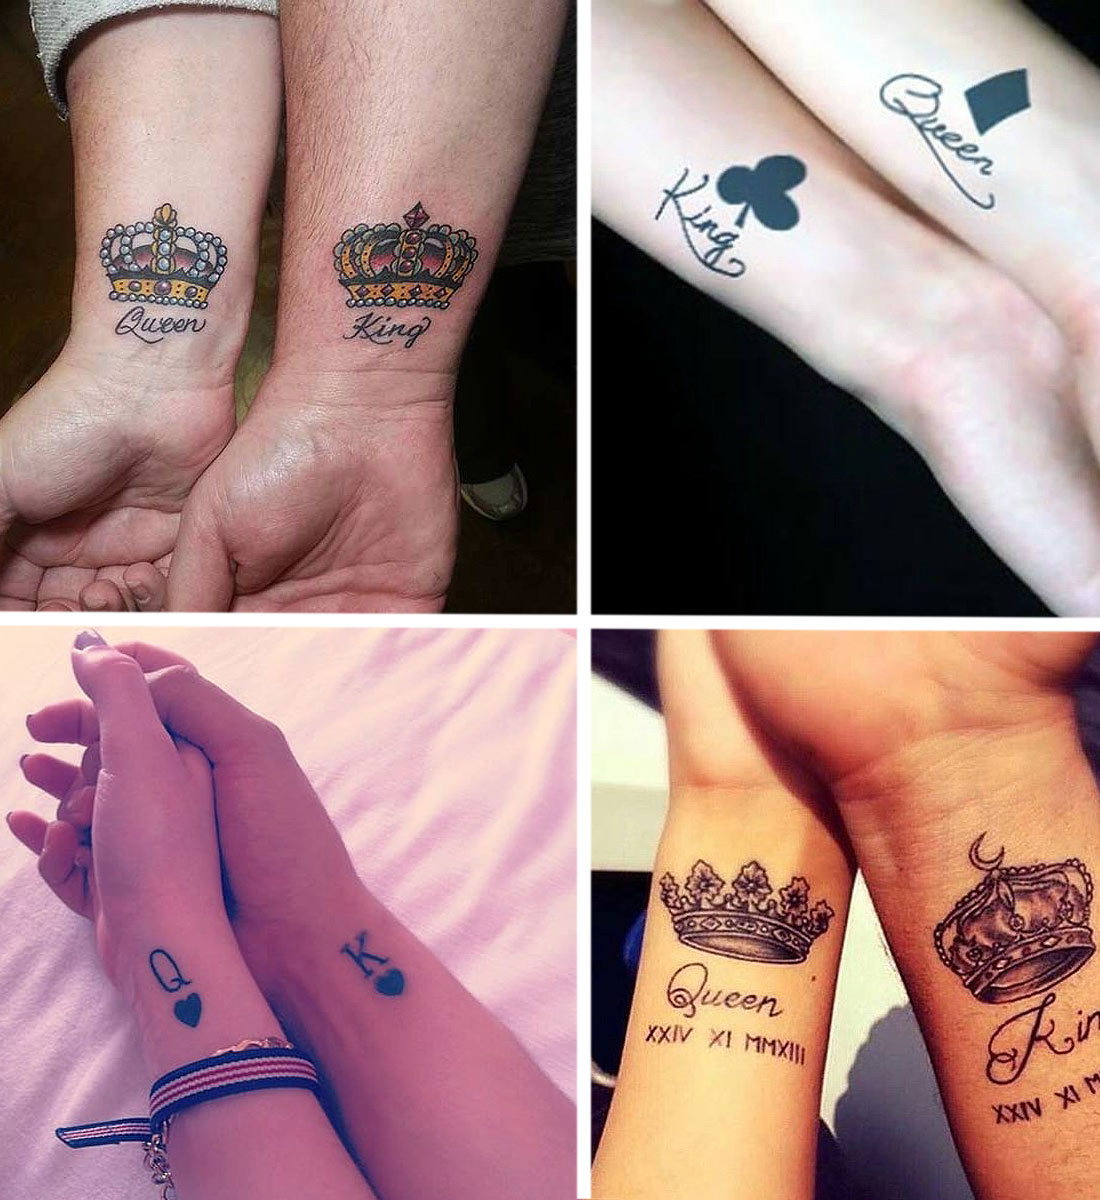 wrist-tattoos-couple-ling-queen-tattoos-latest-trends